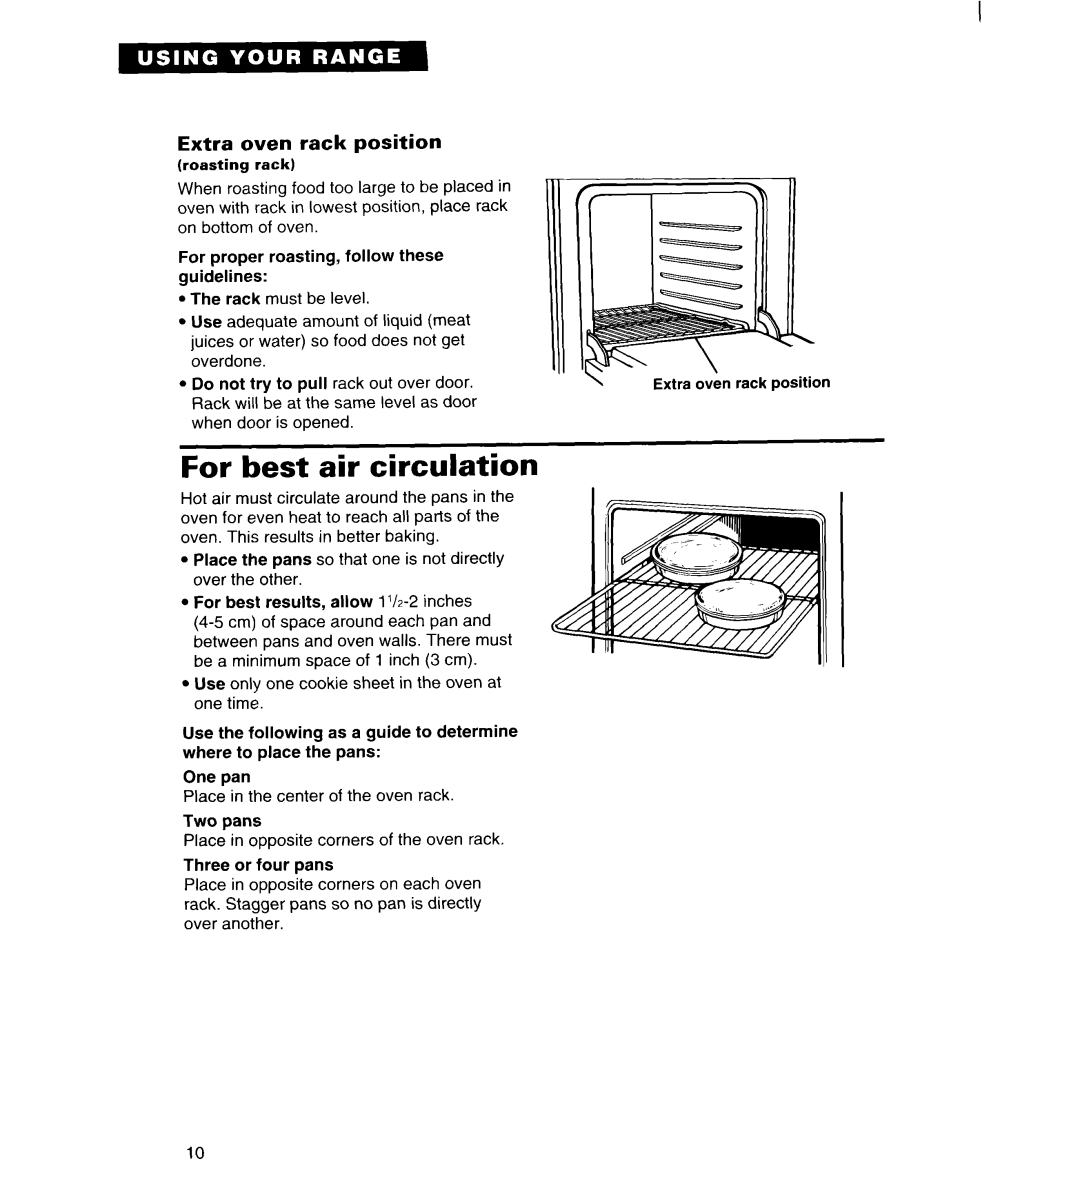 Estate TGRGIWZB manual For best air circulation, Extra oven rack position 